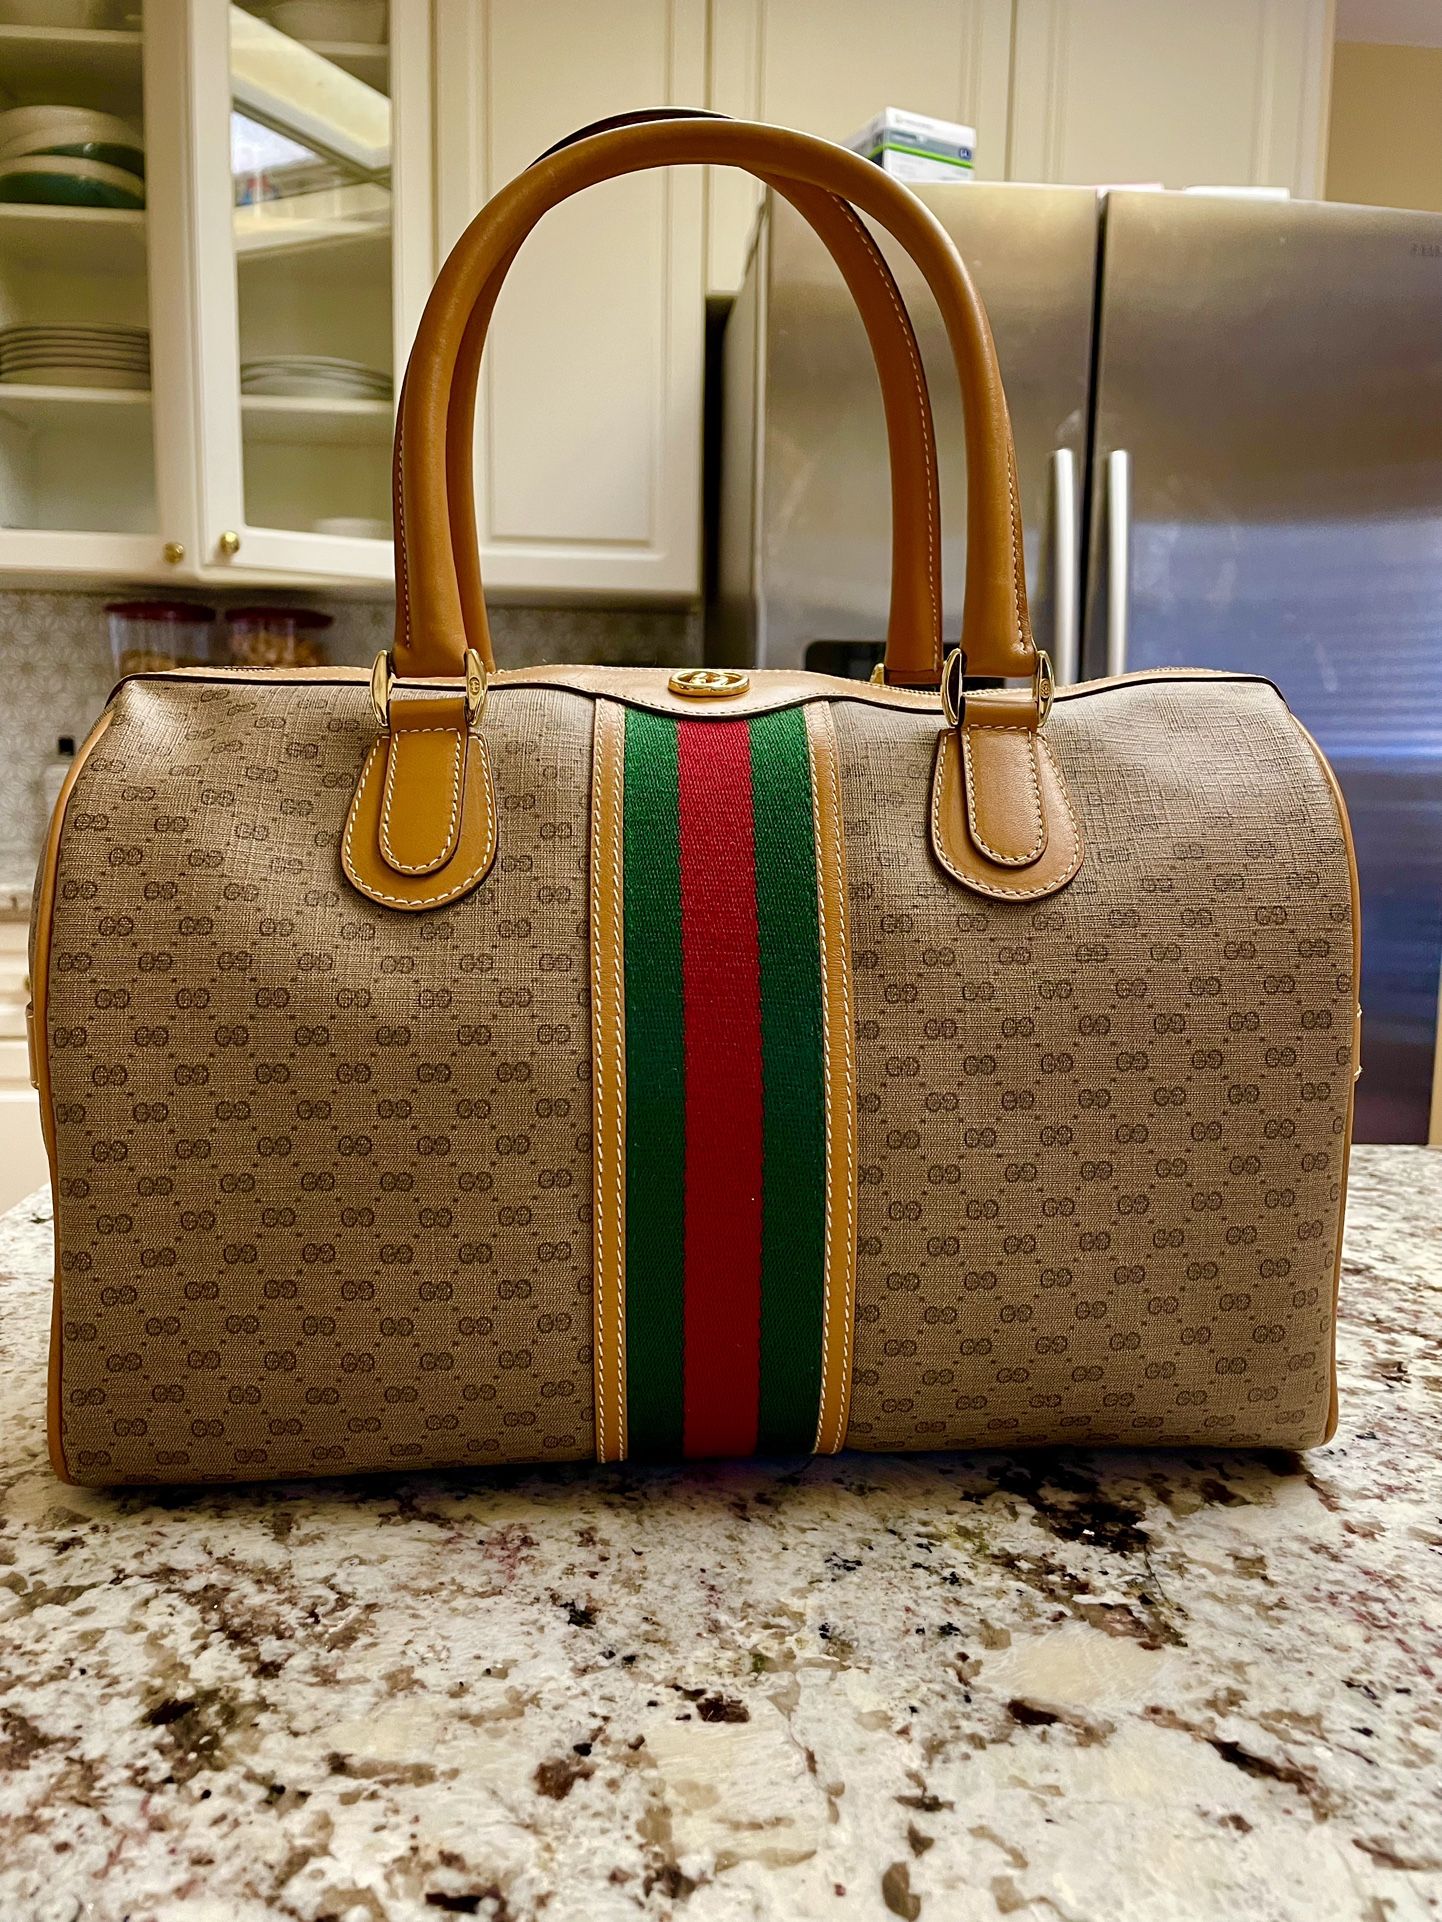 Authenticated Used GUCCI Old Gucci Vintage Travel Bag Boston